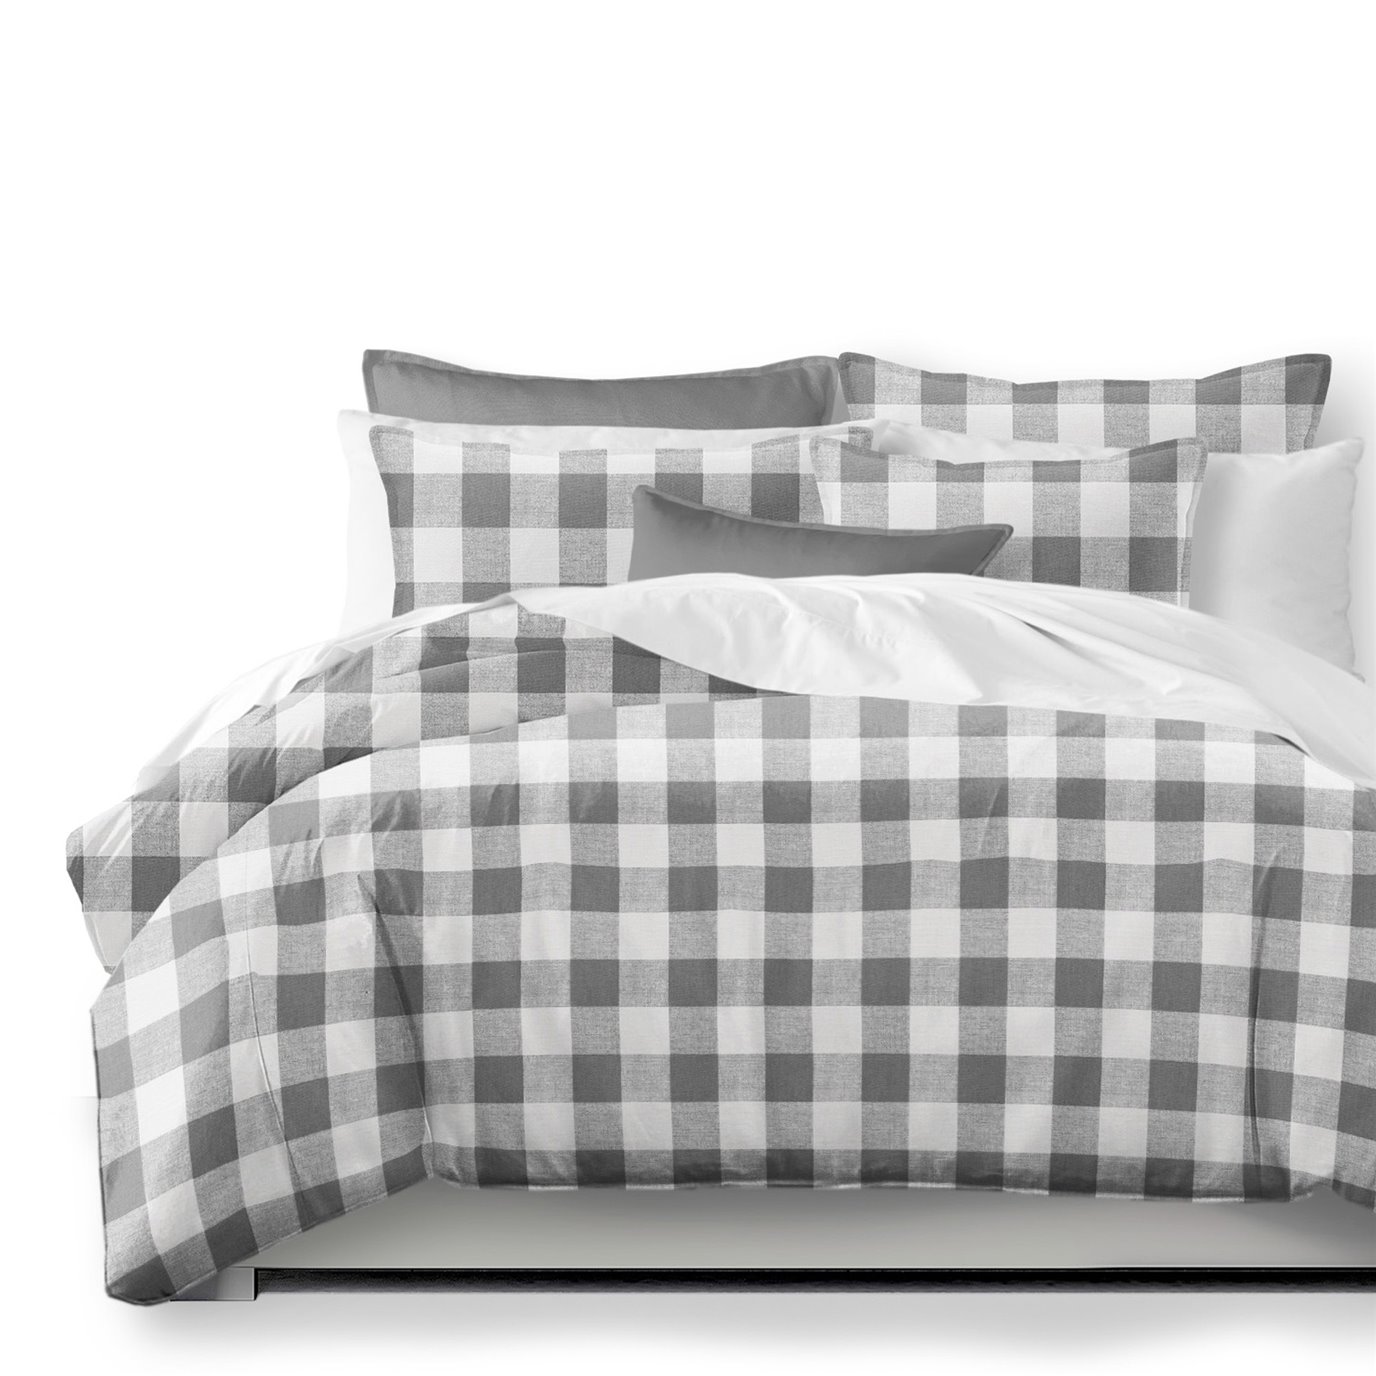 Lumberjack Check Gray/White Coverlet and Pillow Sham(s) Set - Size Super Queen